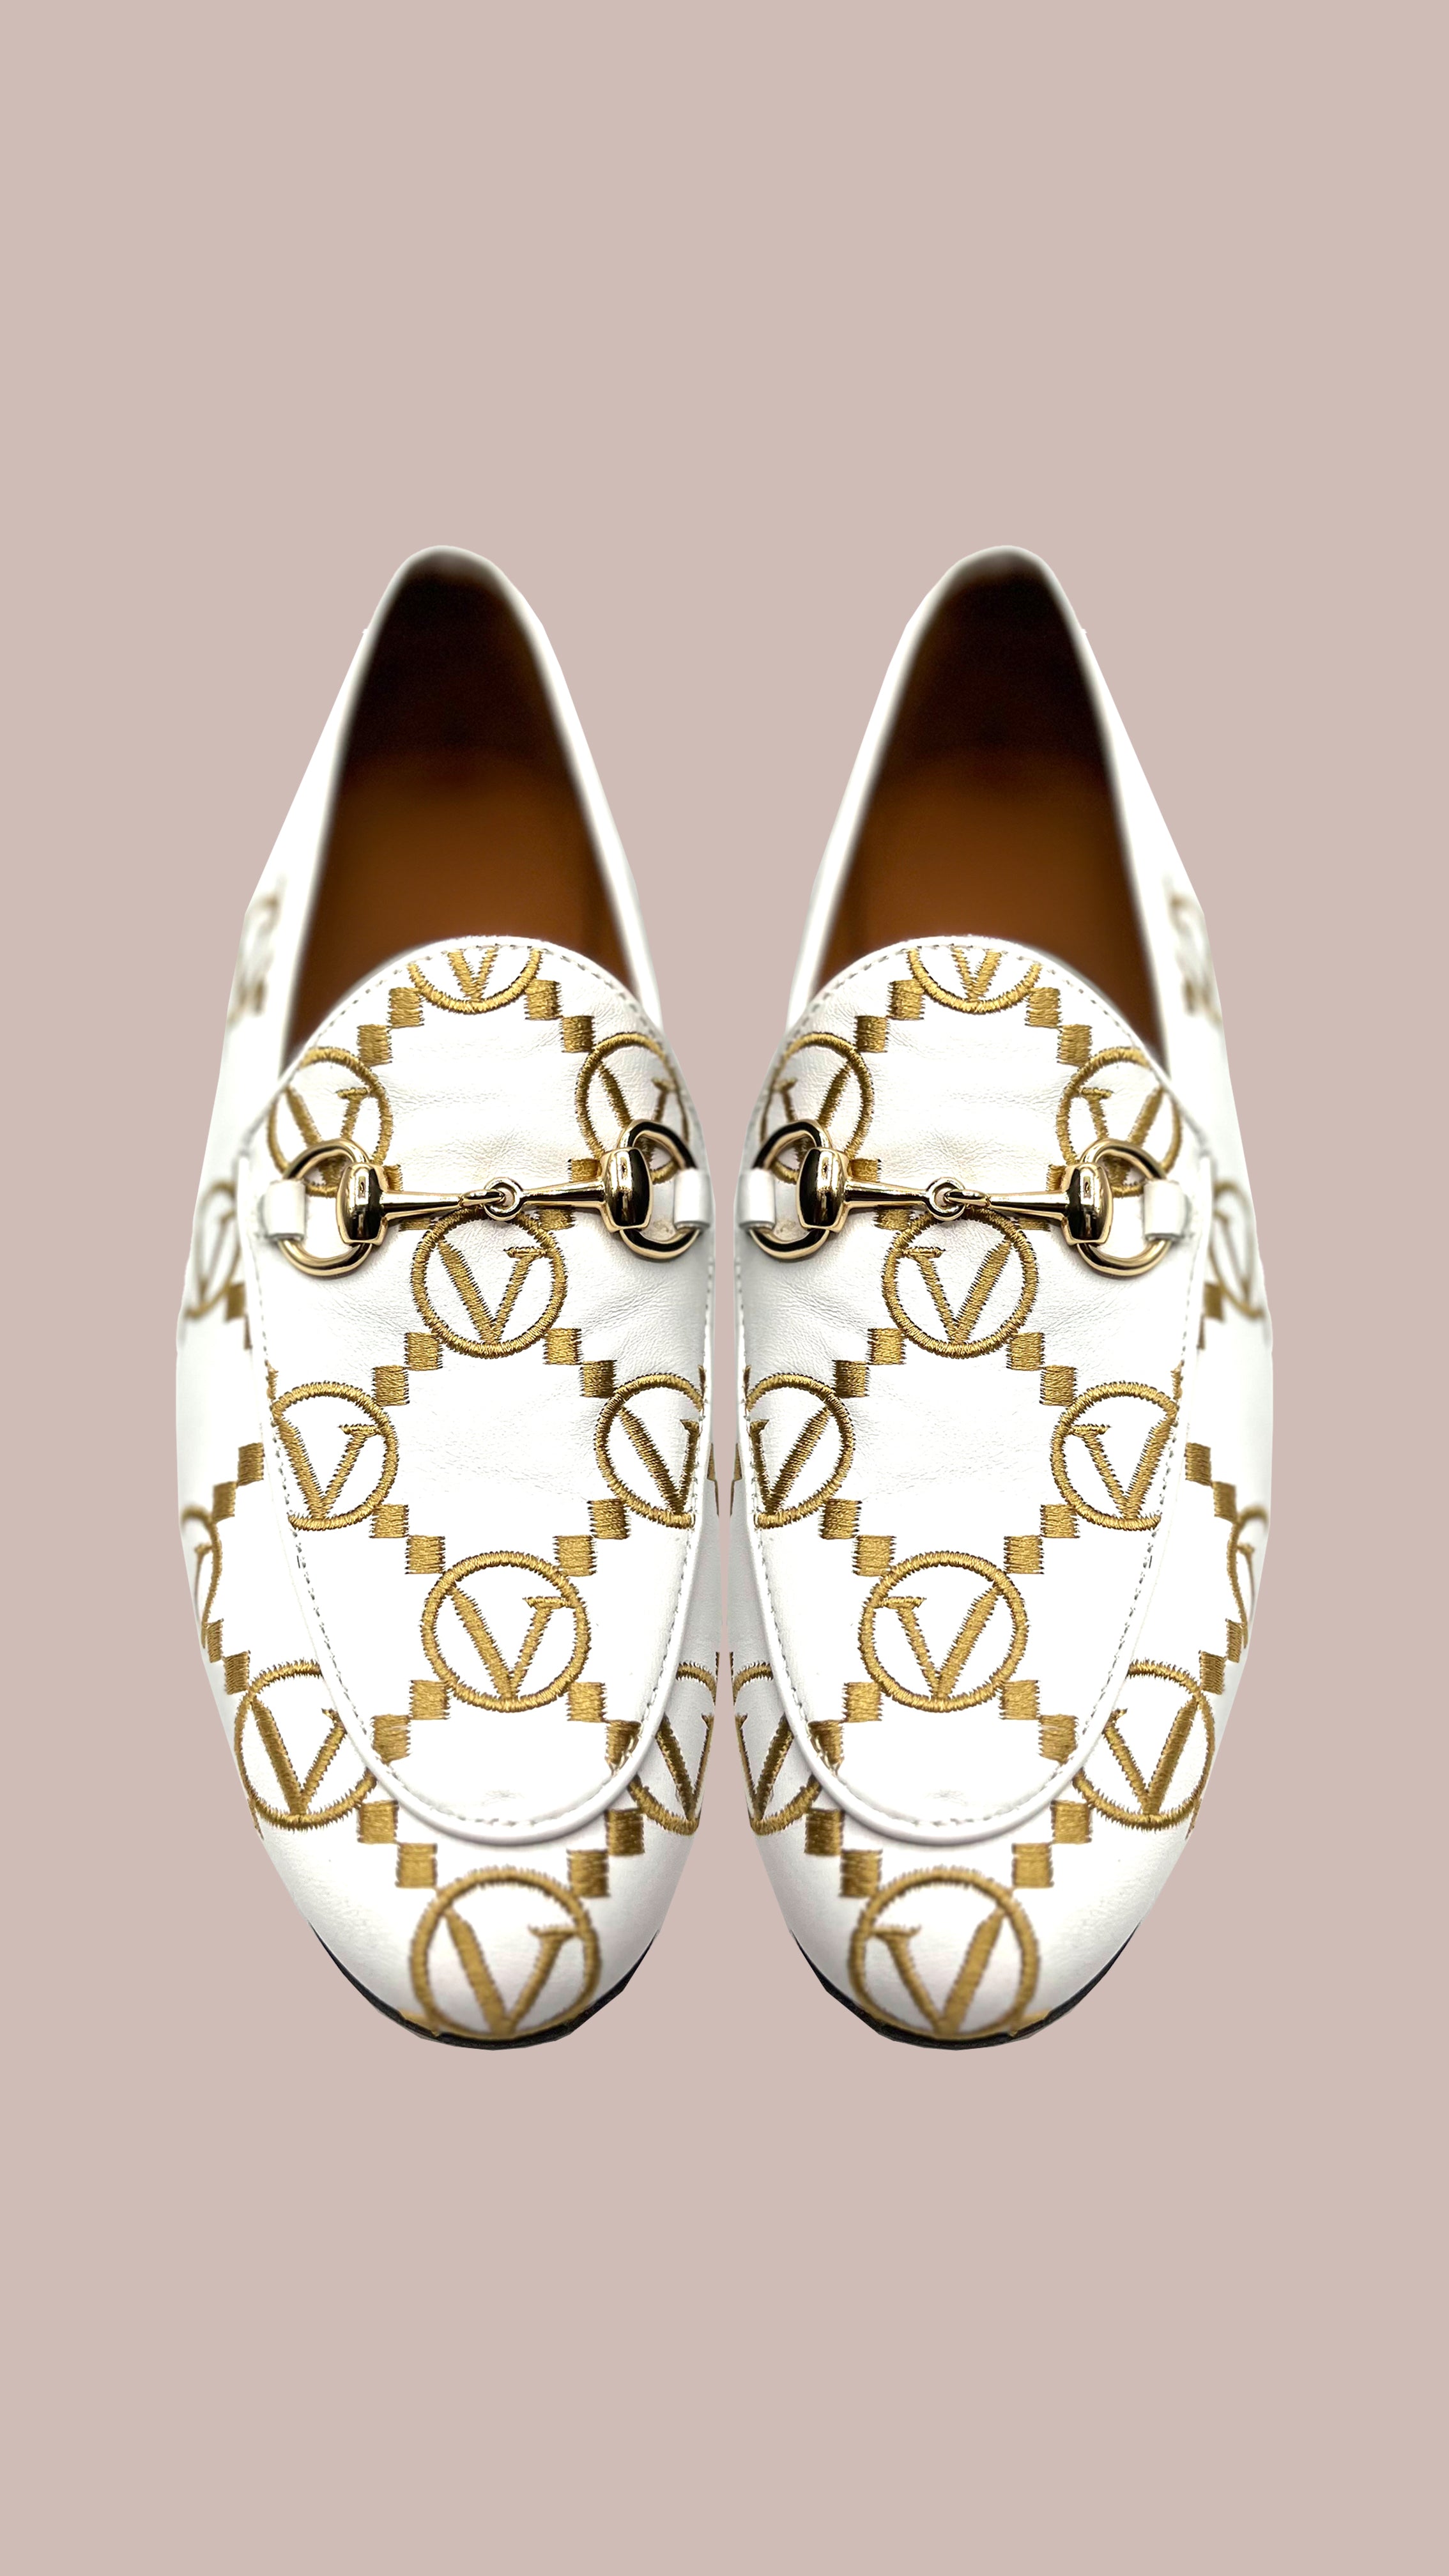 white v sign shoes SHOES Shoe Collection Vercini